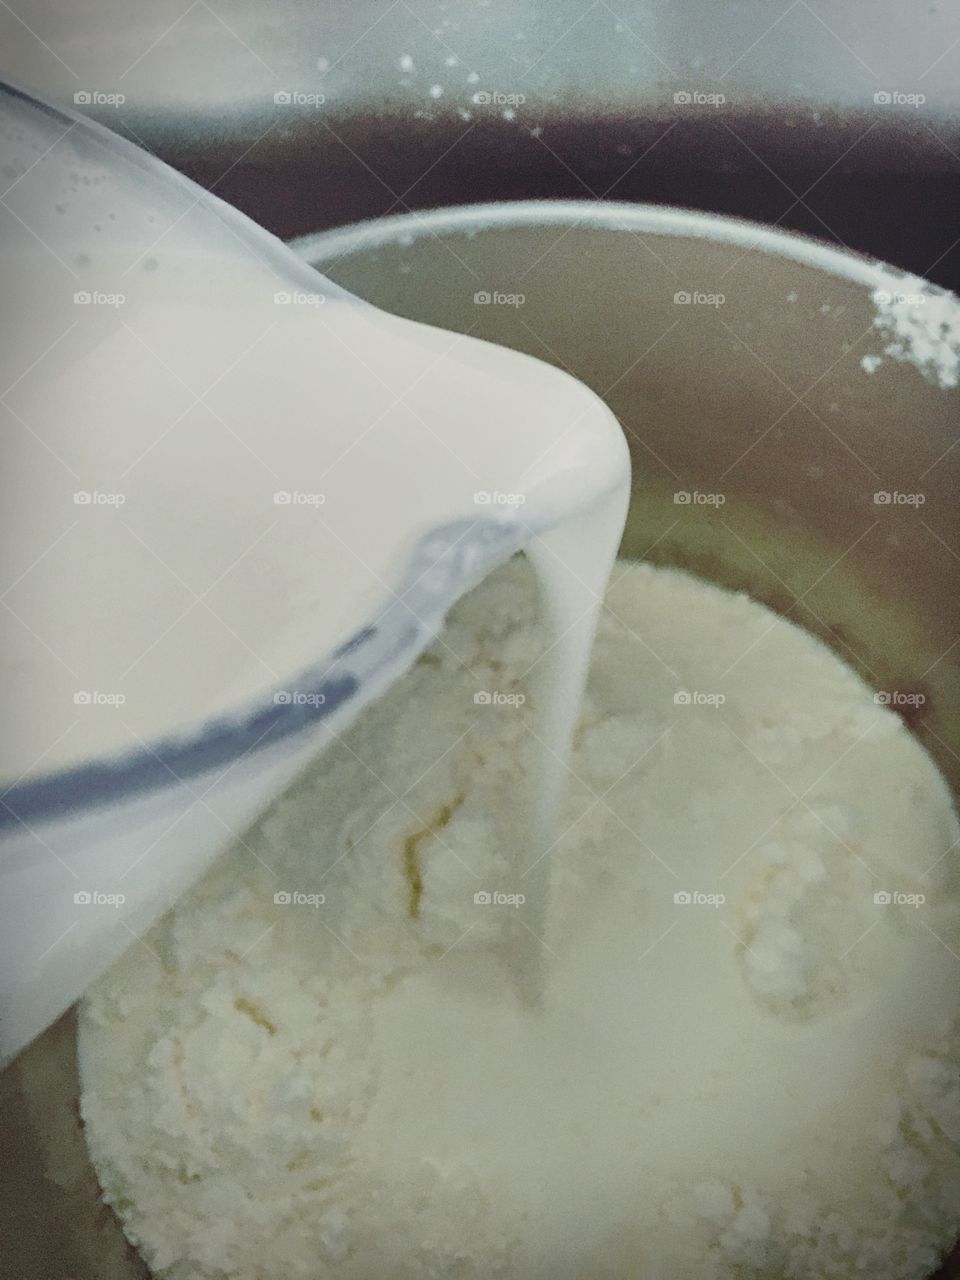 Let's Bake a Cake.   Heavy Cream is being poured into a mixing bowl containing a flour mixture.  